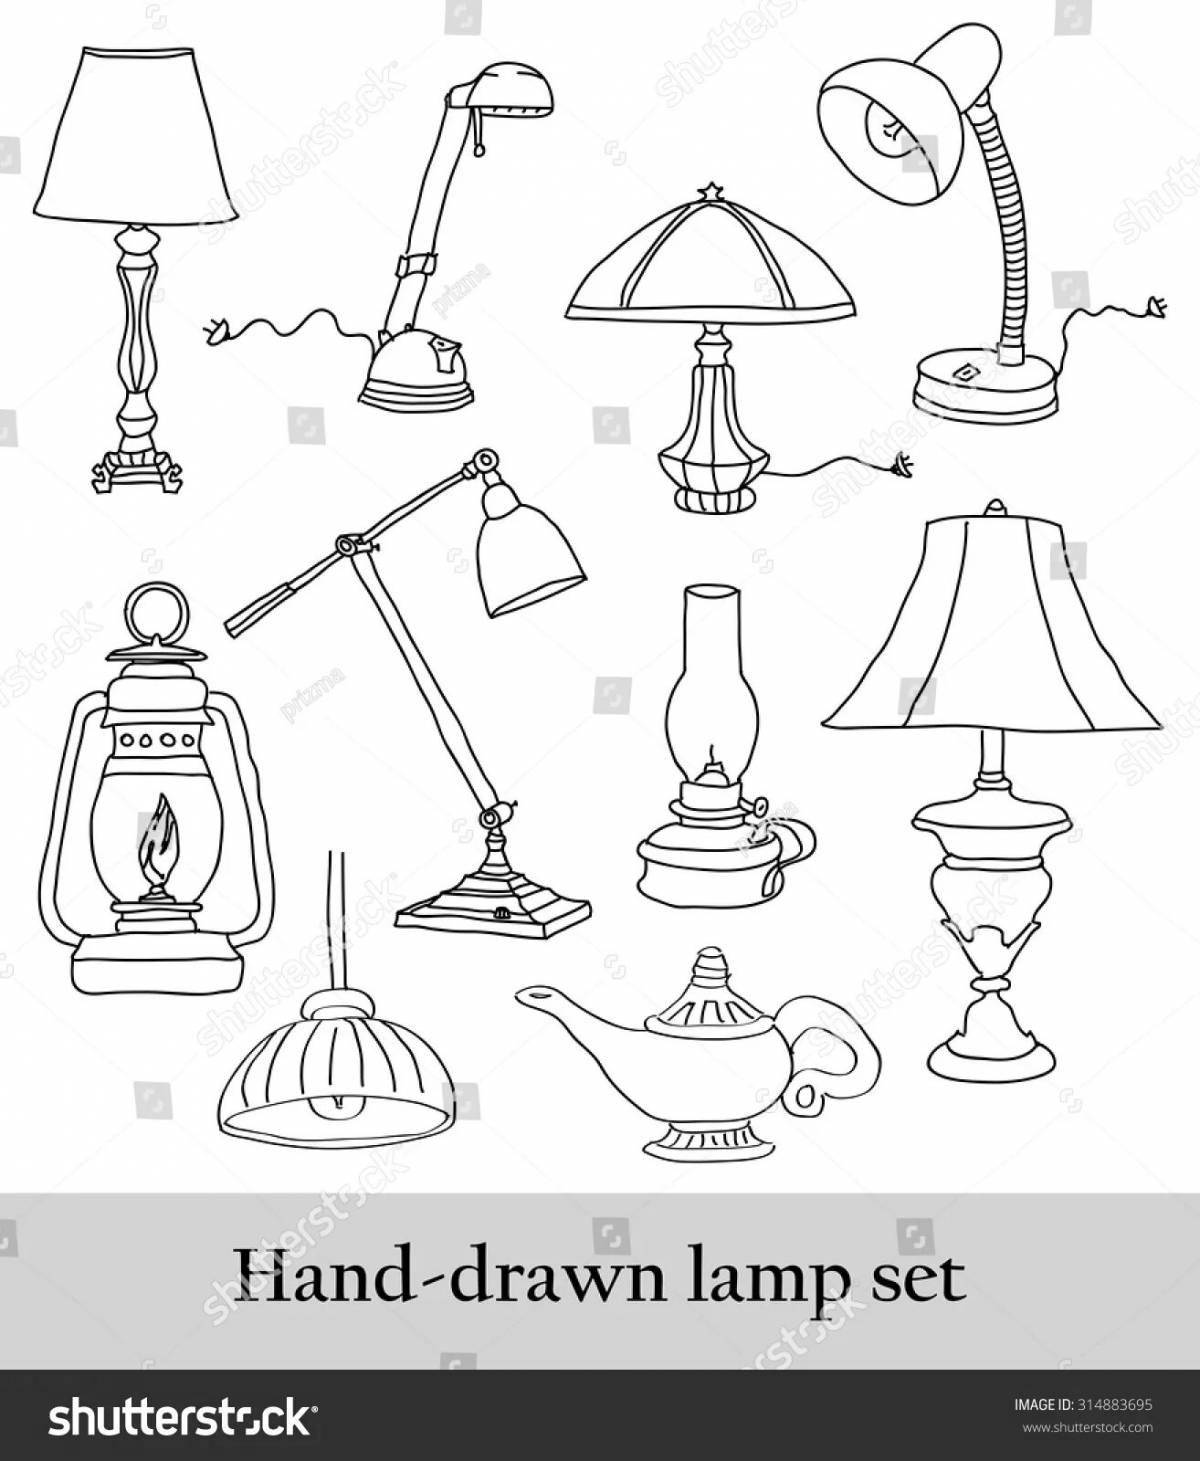 Serendipitous night light coloring page